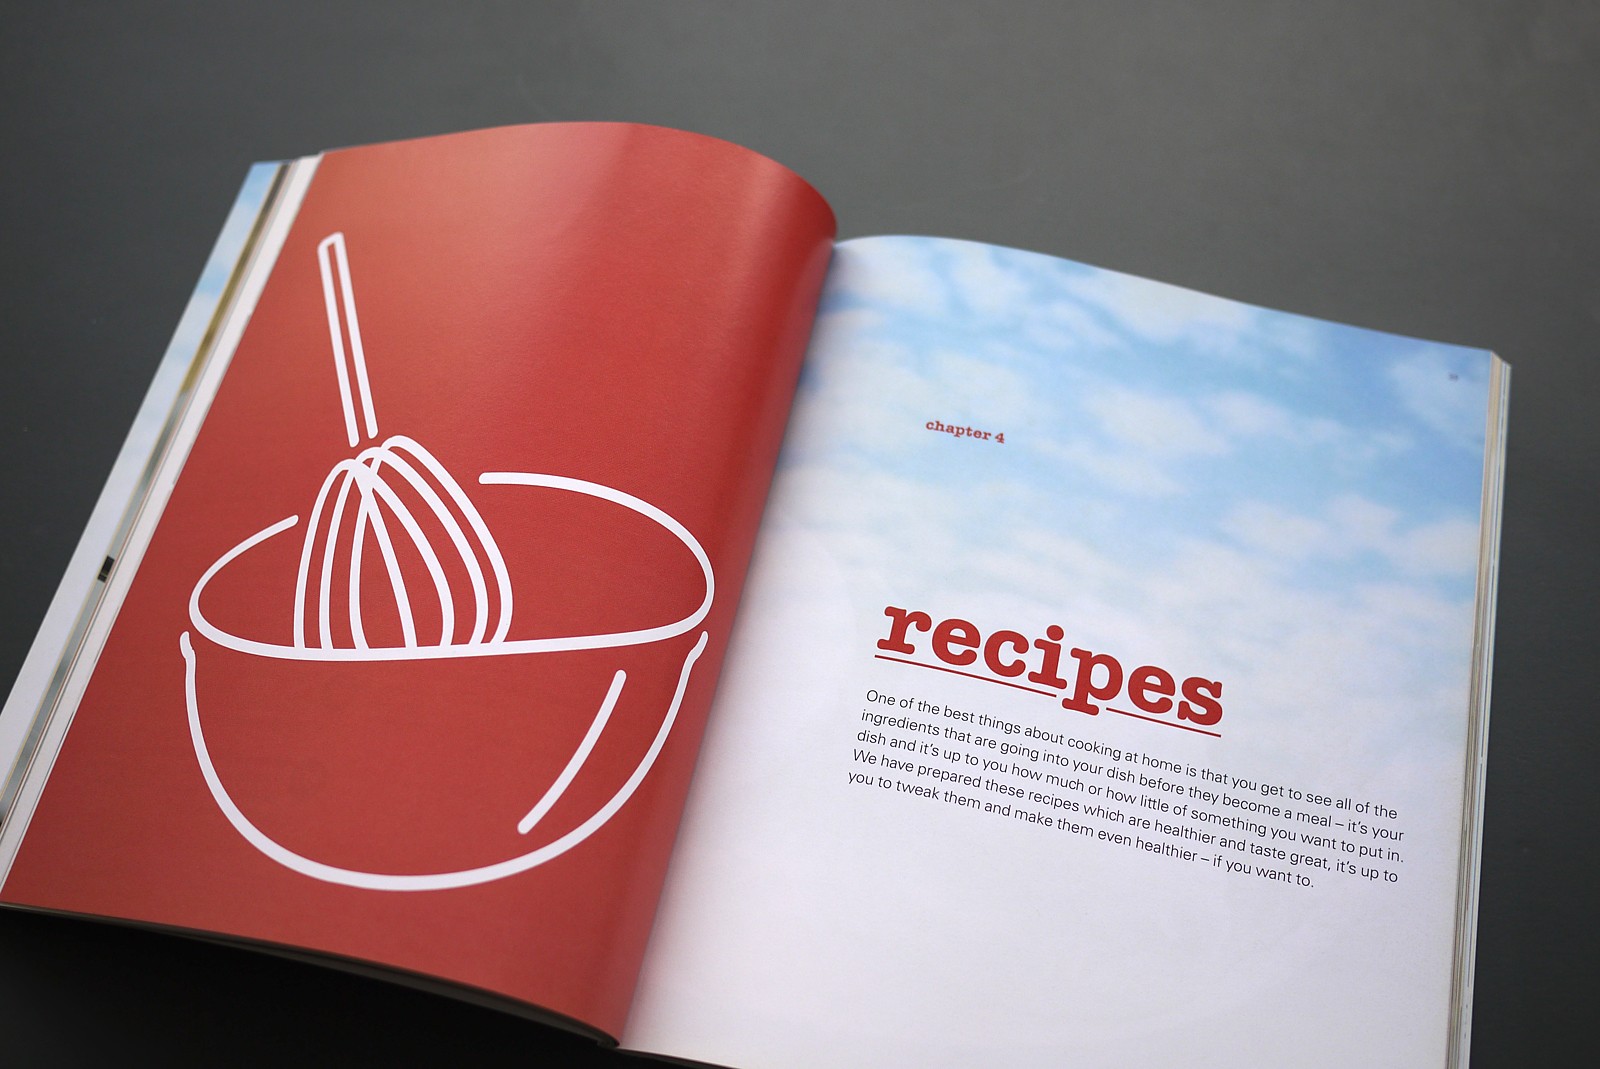 Can Cook branding and cook books